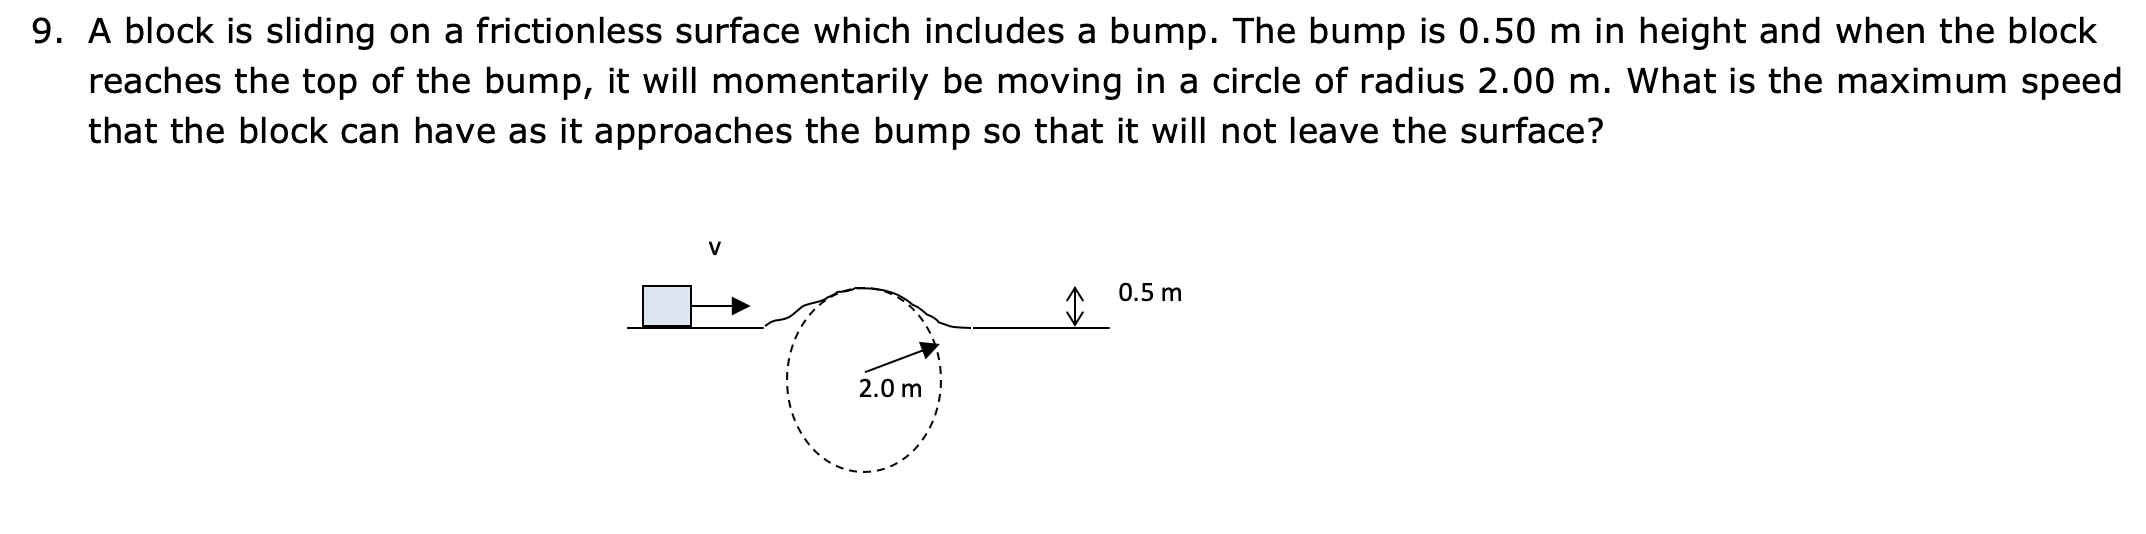 9. A block is sliding on a frictionless surface which includes a bump. The bump is 0.50 m in height and when the block
reaches the top of the bump, it will momentarily be moving in a circle of radius 2.00 m. What is the maximum speed
that the block can have as it approaches the bump so that it will not leave the surface?
0.5 m
2.0 m
